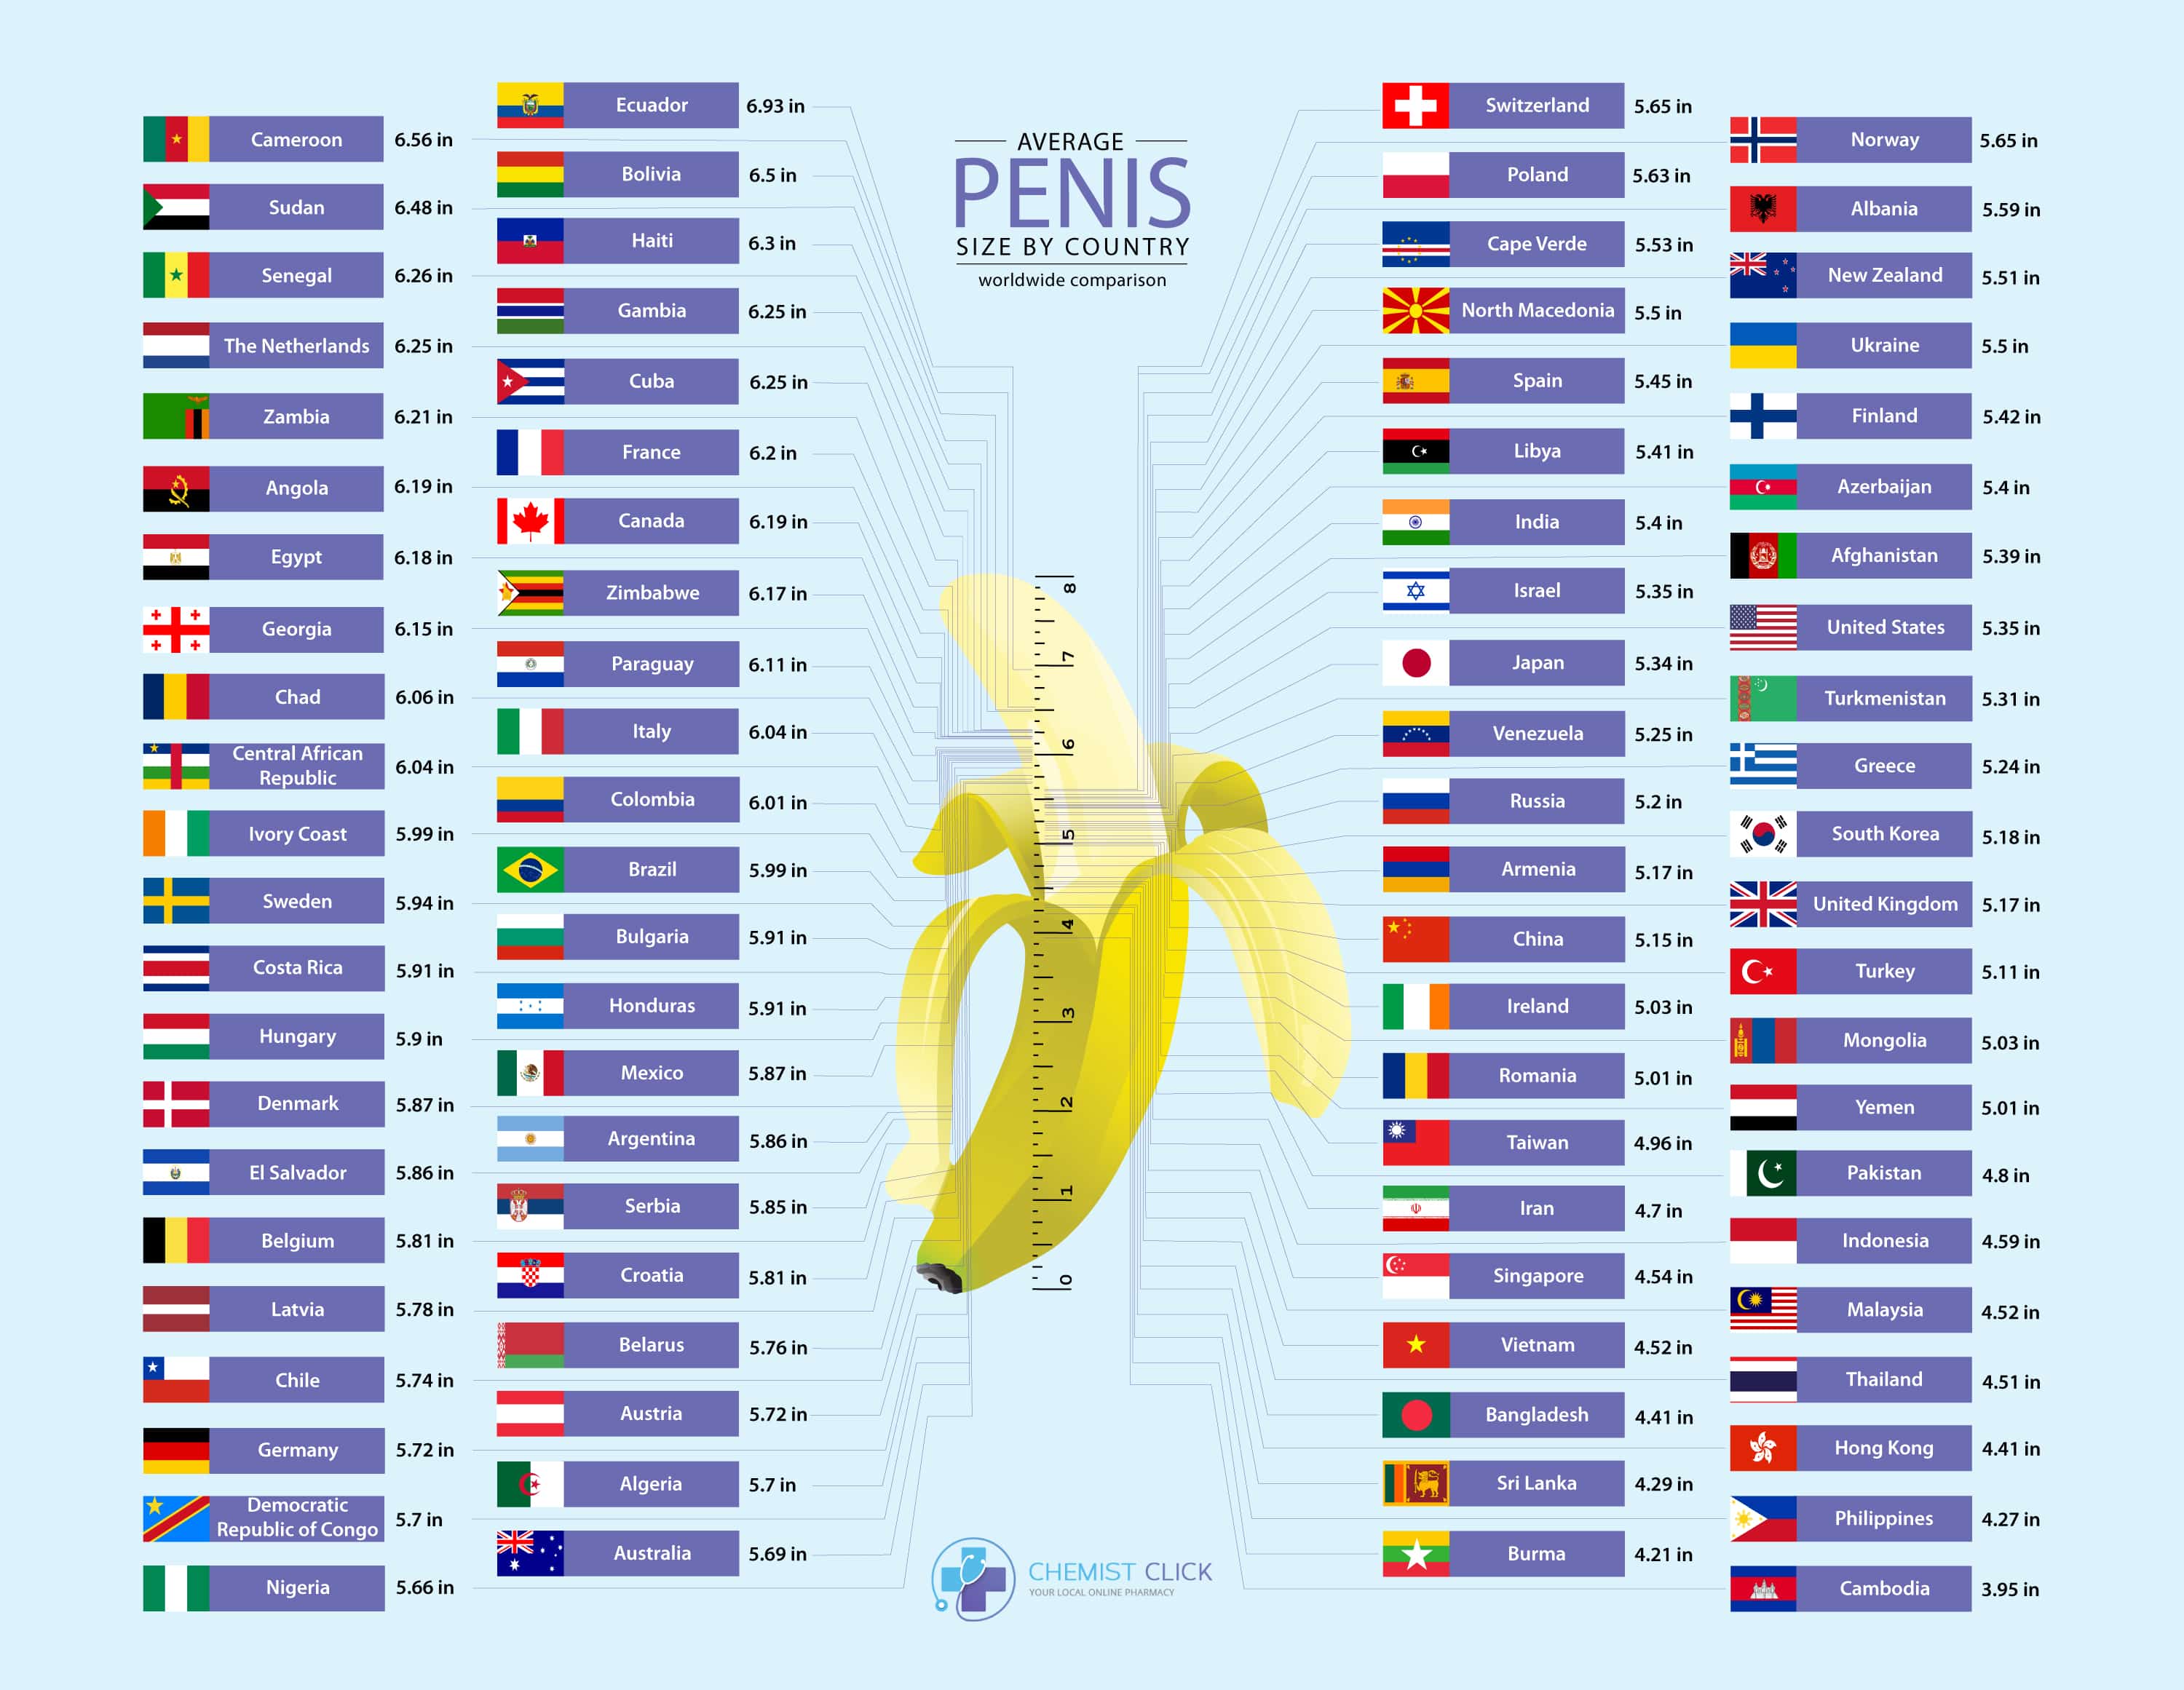 Average dick size according to country